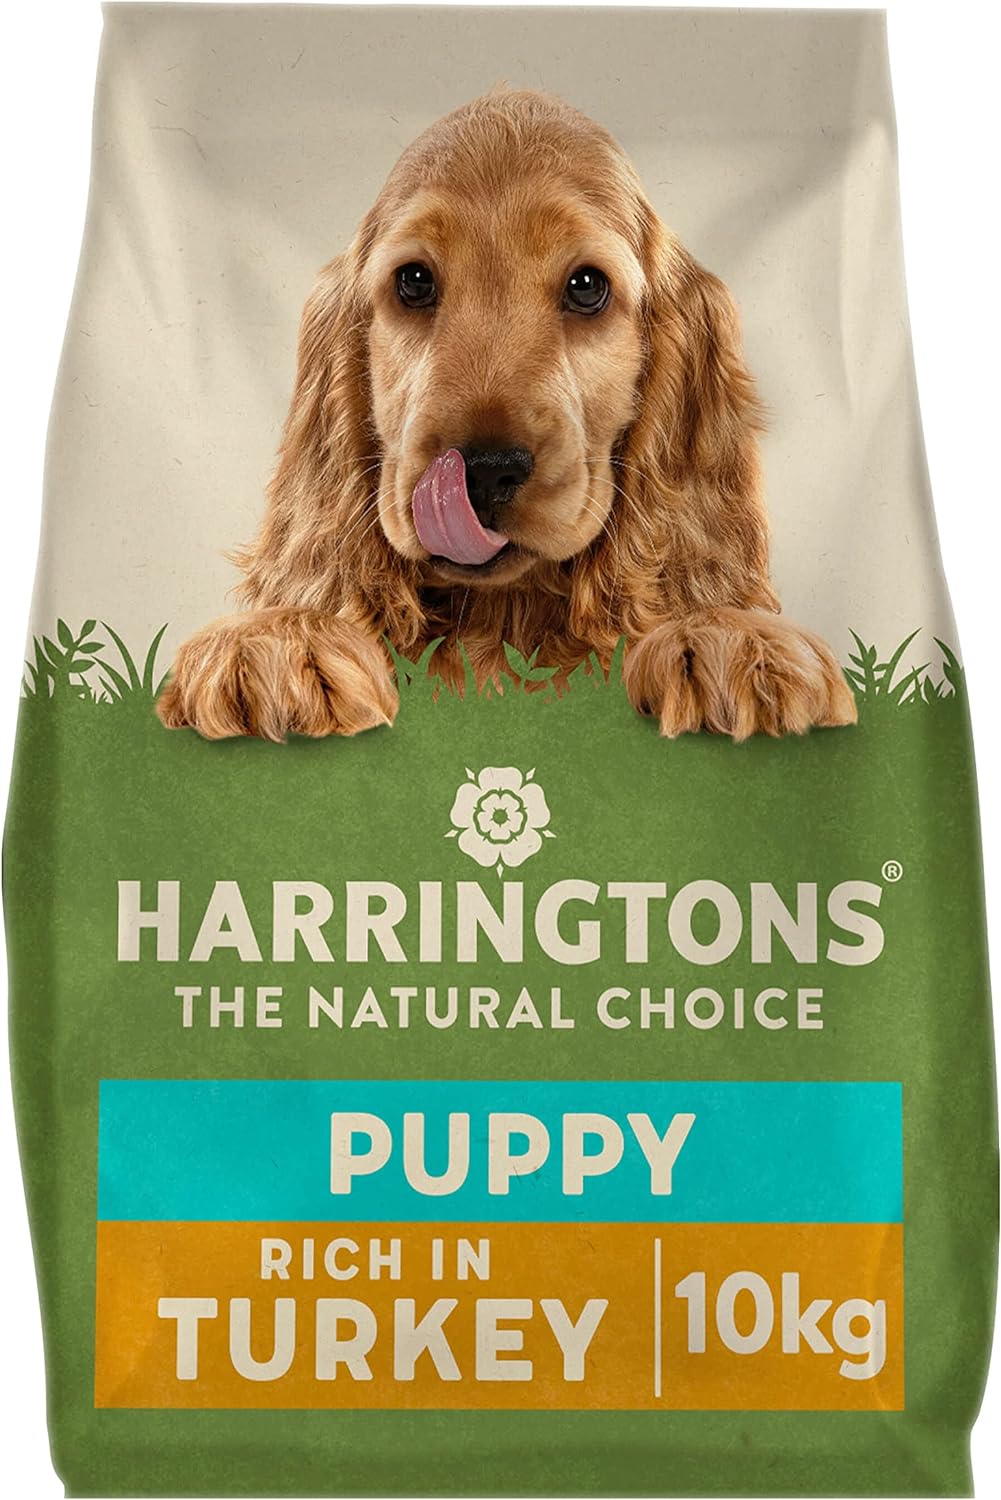 Harringtons Complete Puppy Dry Dog Food Turkey & Rice 10kg - Made with All Natural Ingredients?HARRPUP-10